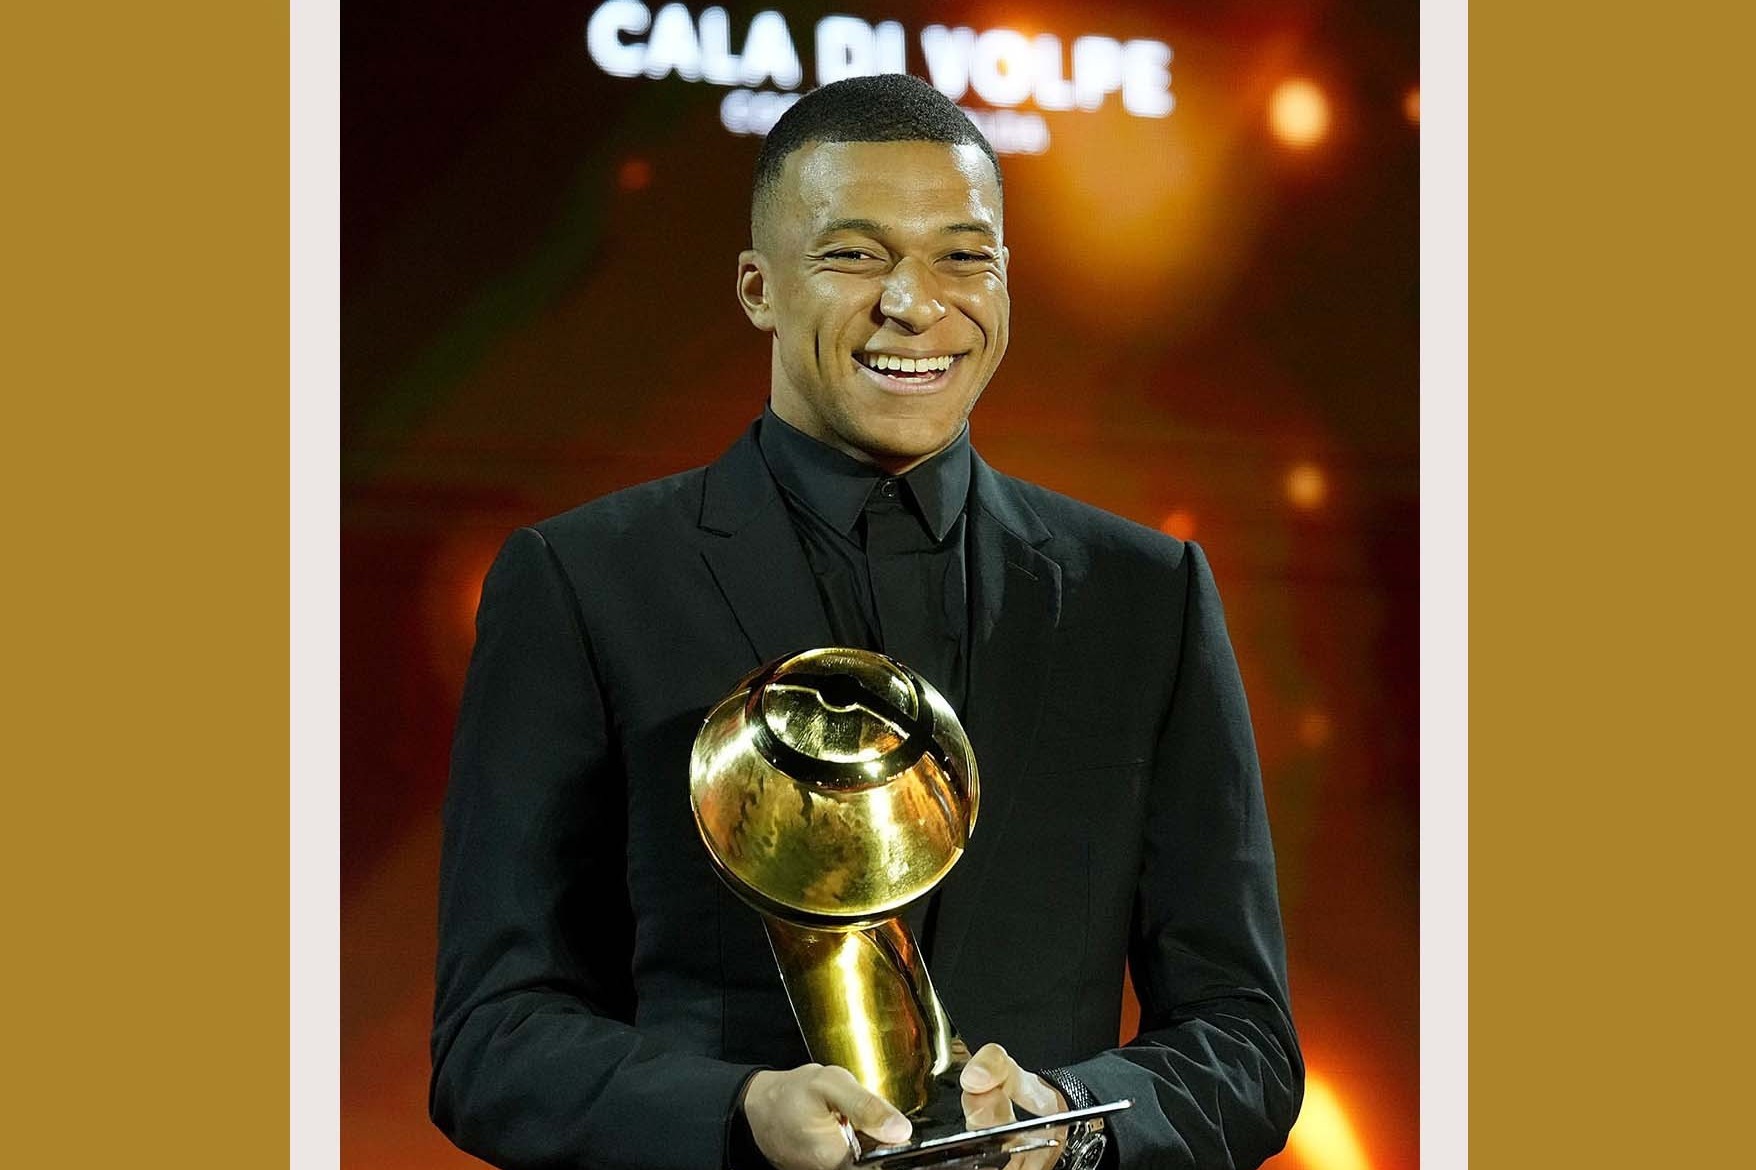 Kylian Mbappé Wins Best Player of the Year - PHOTO